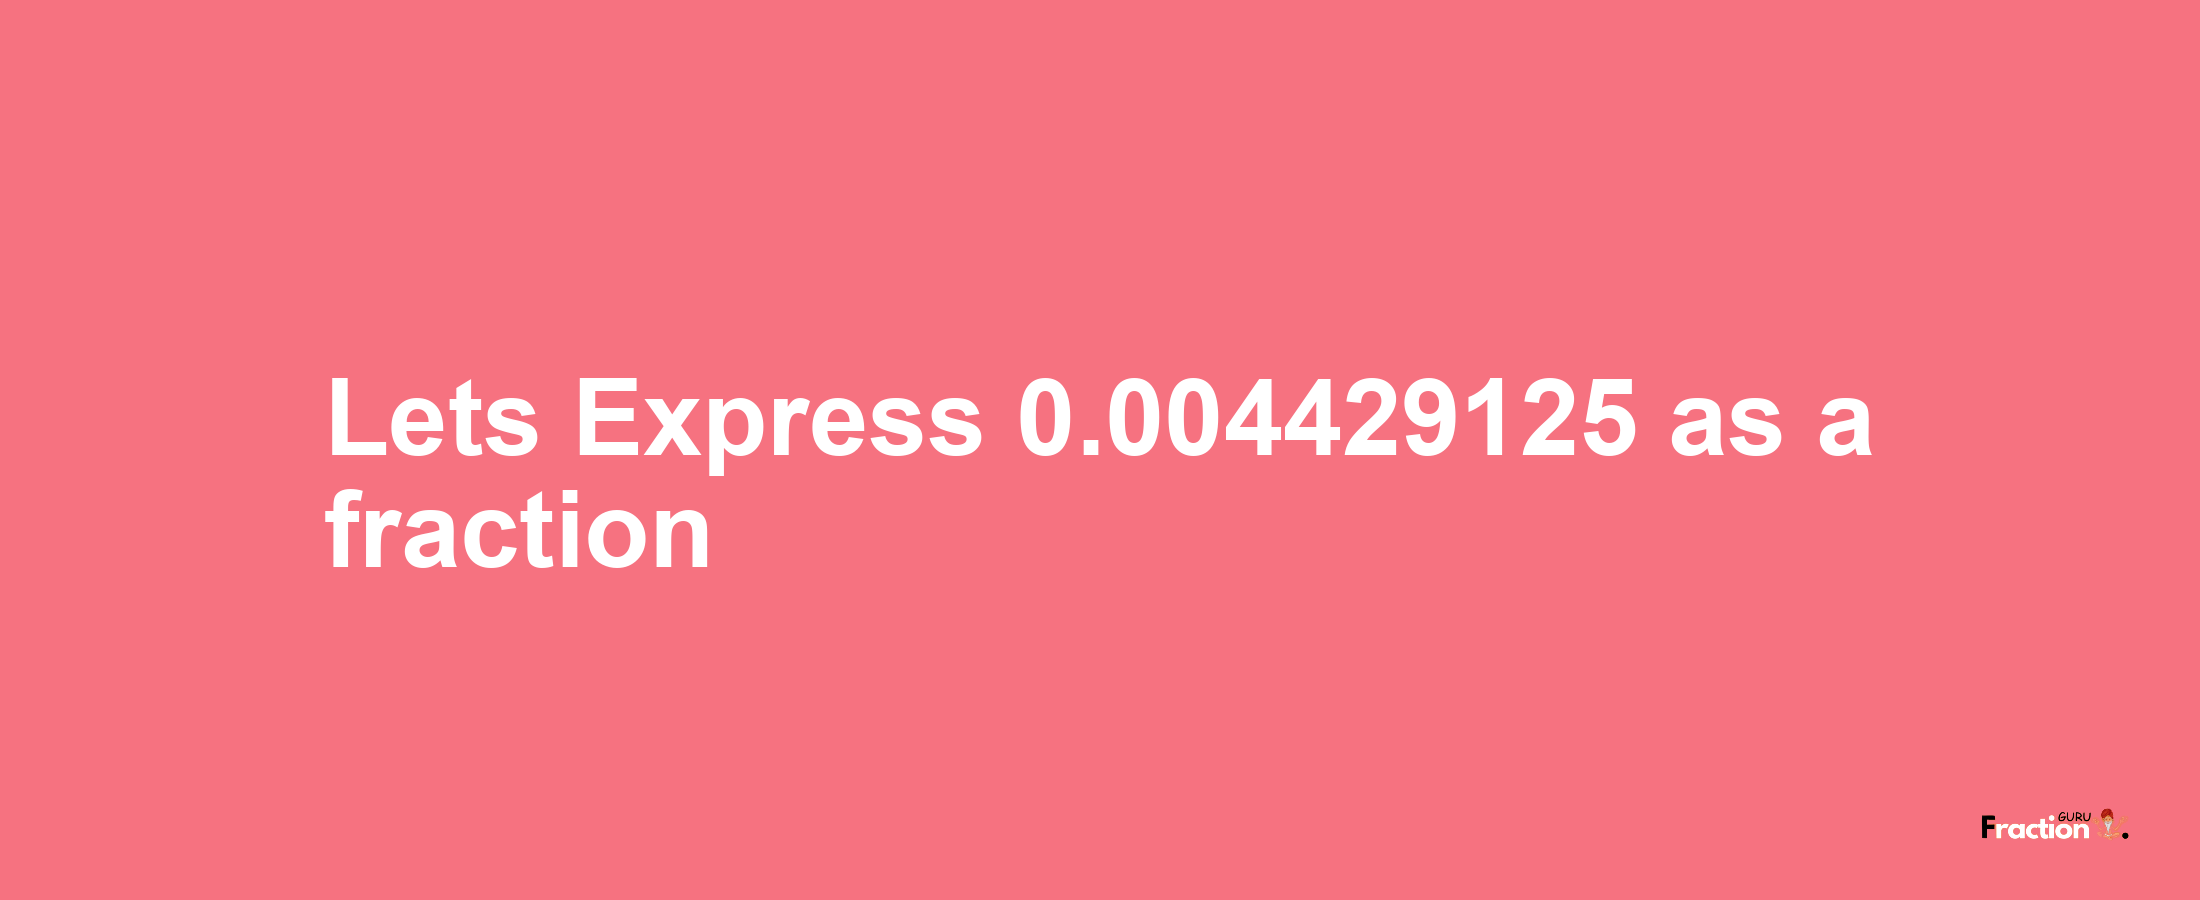 Lets Express 0.004429125 as afraction